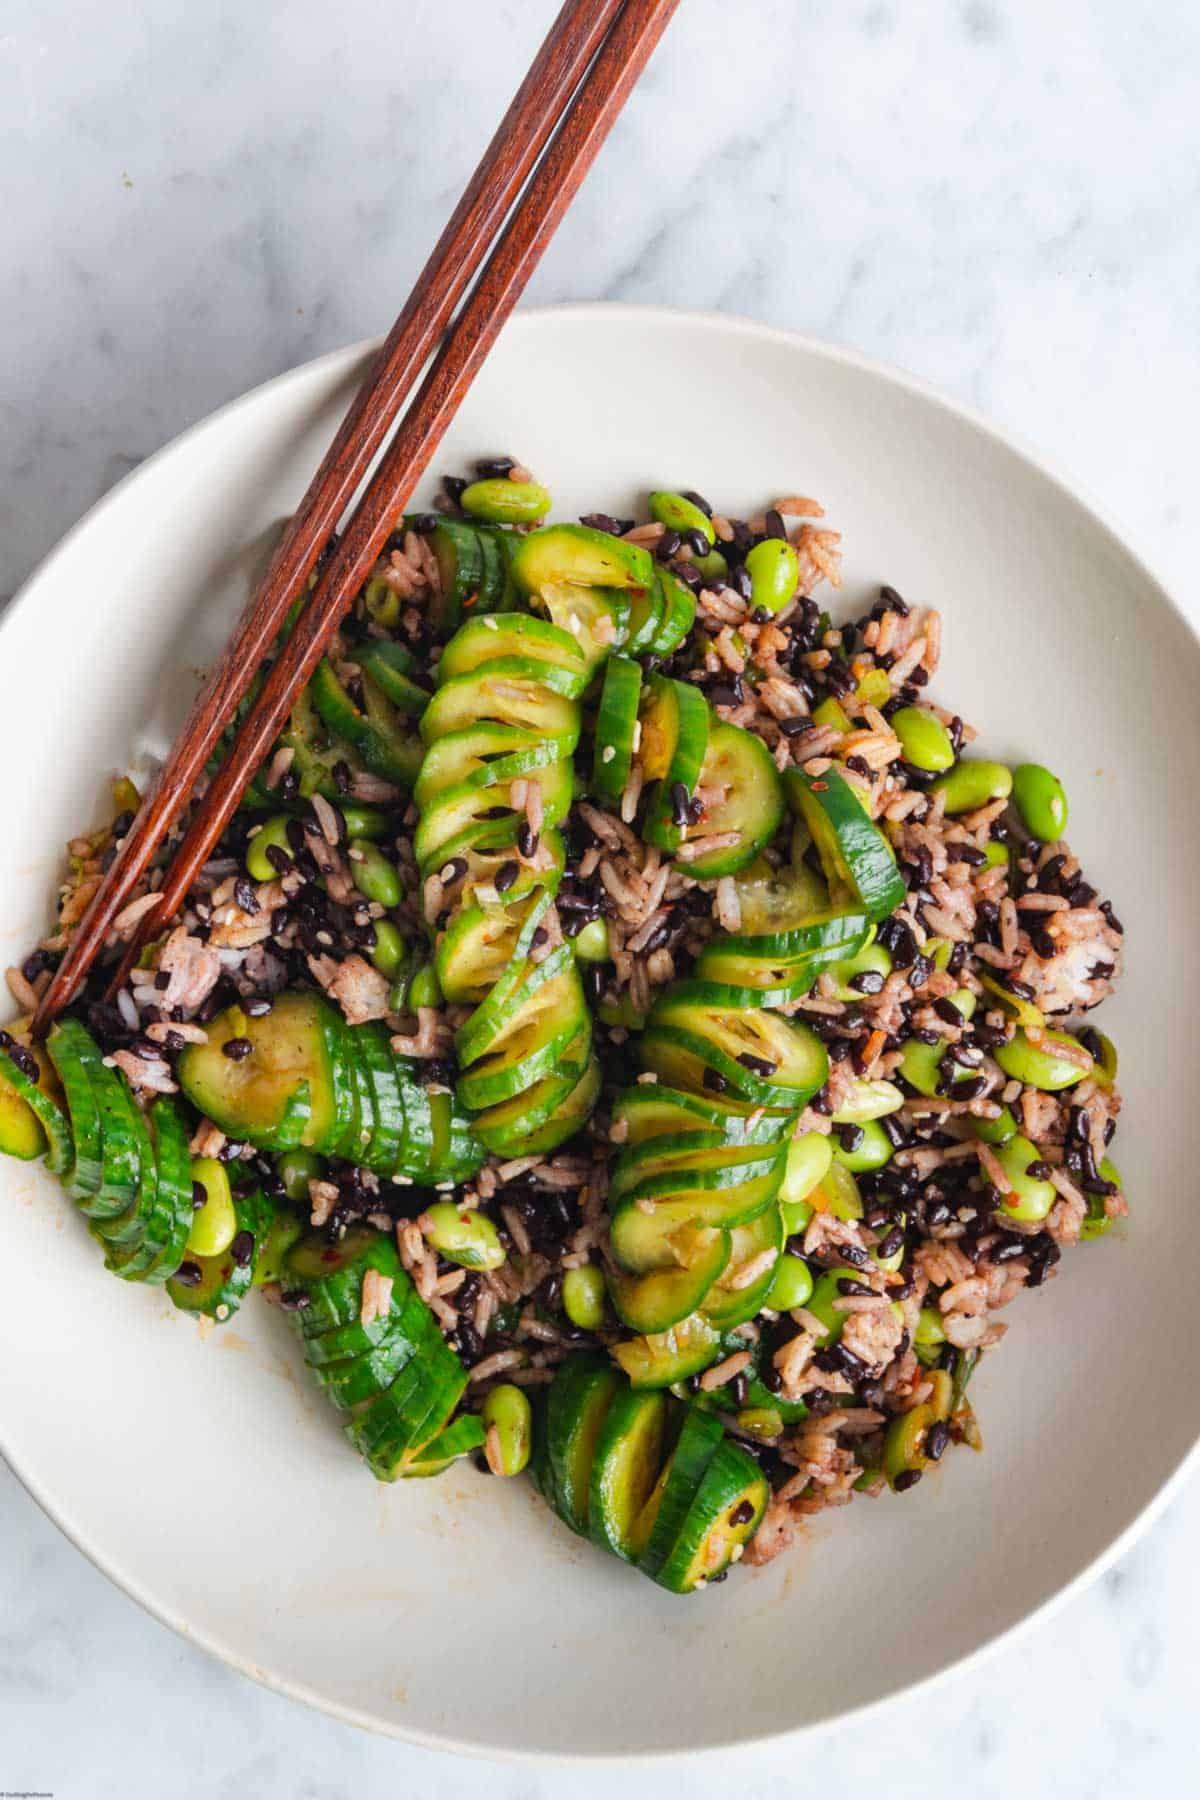 Accordion-cut cucumbers is a red Korean salad dressing with black and white rice, edamame, and chopsticks in a white bowl.